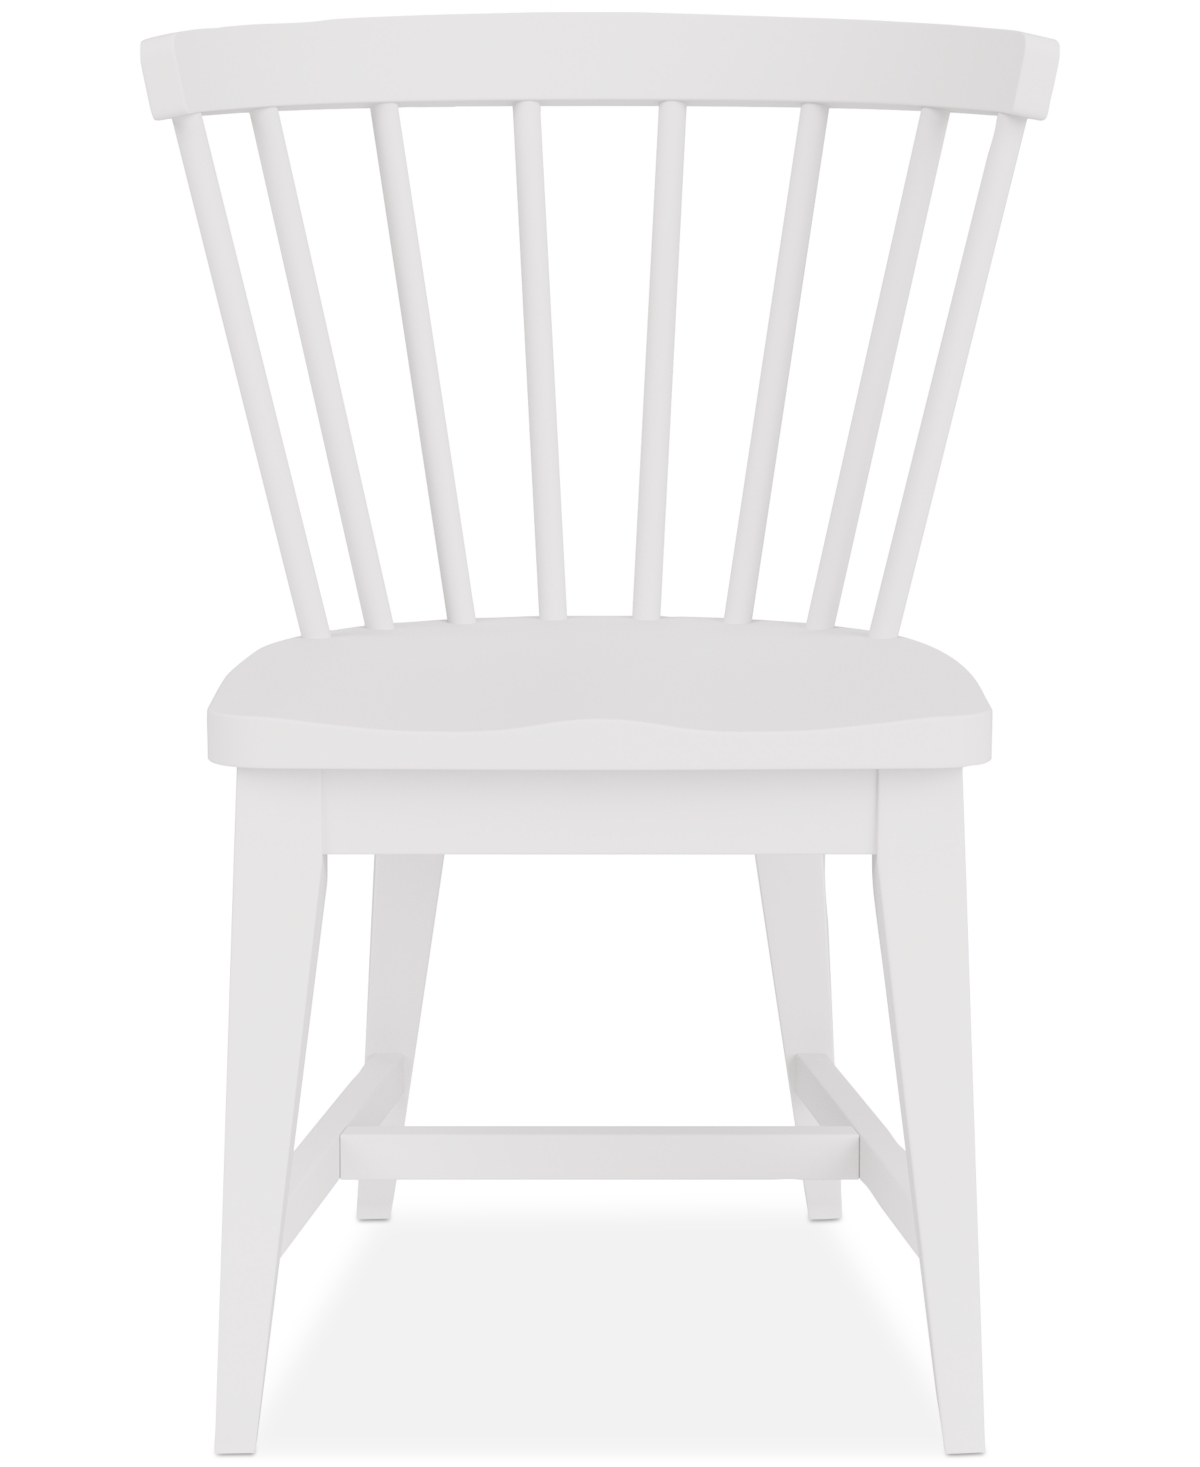 Shop Macy's Catriona 4 Pc. Wood Side Chair Set In White